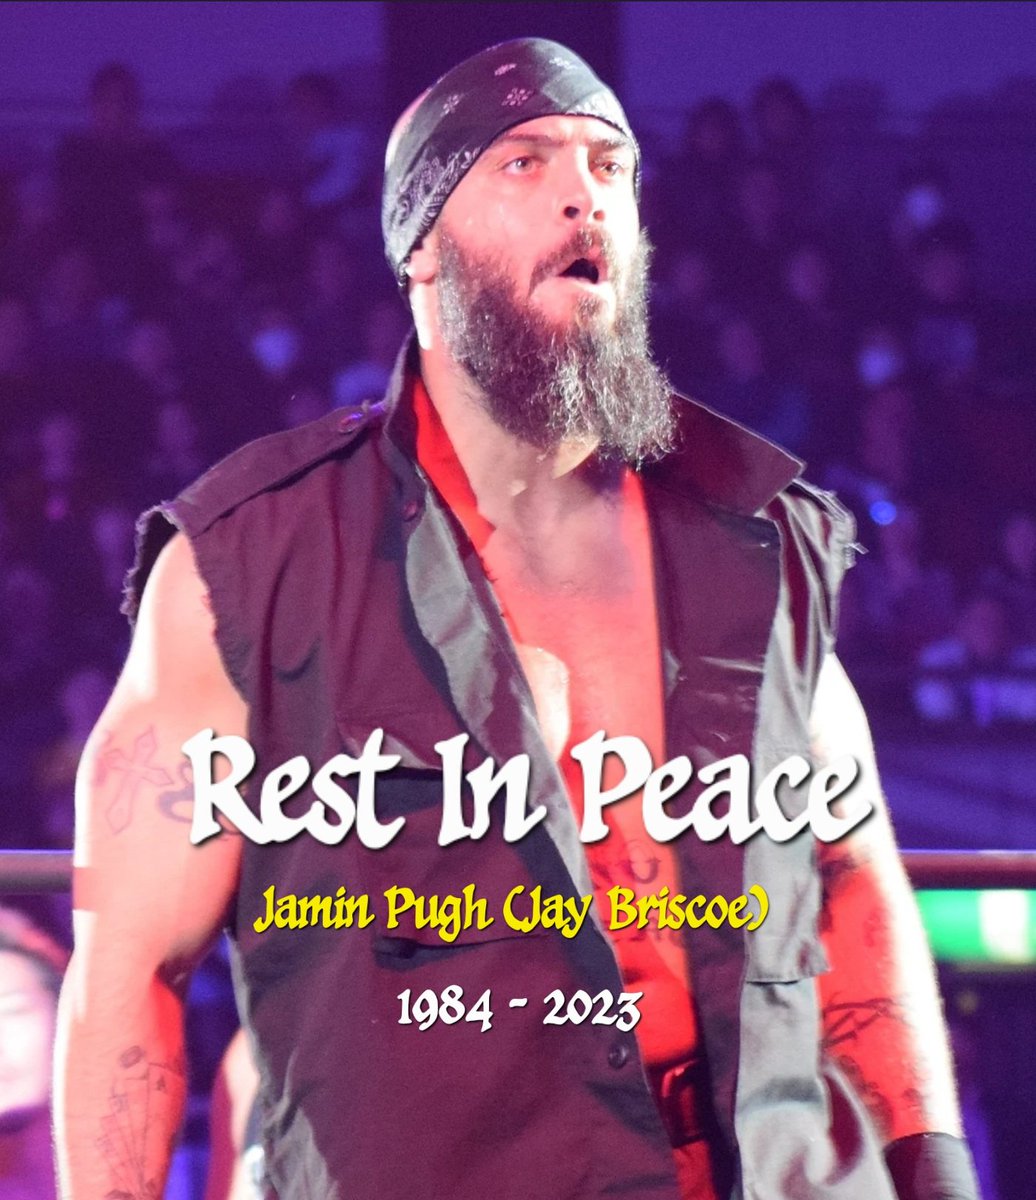 Another wrestling great taken way too soon. 
#RIP #THEBRISCOES